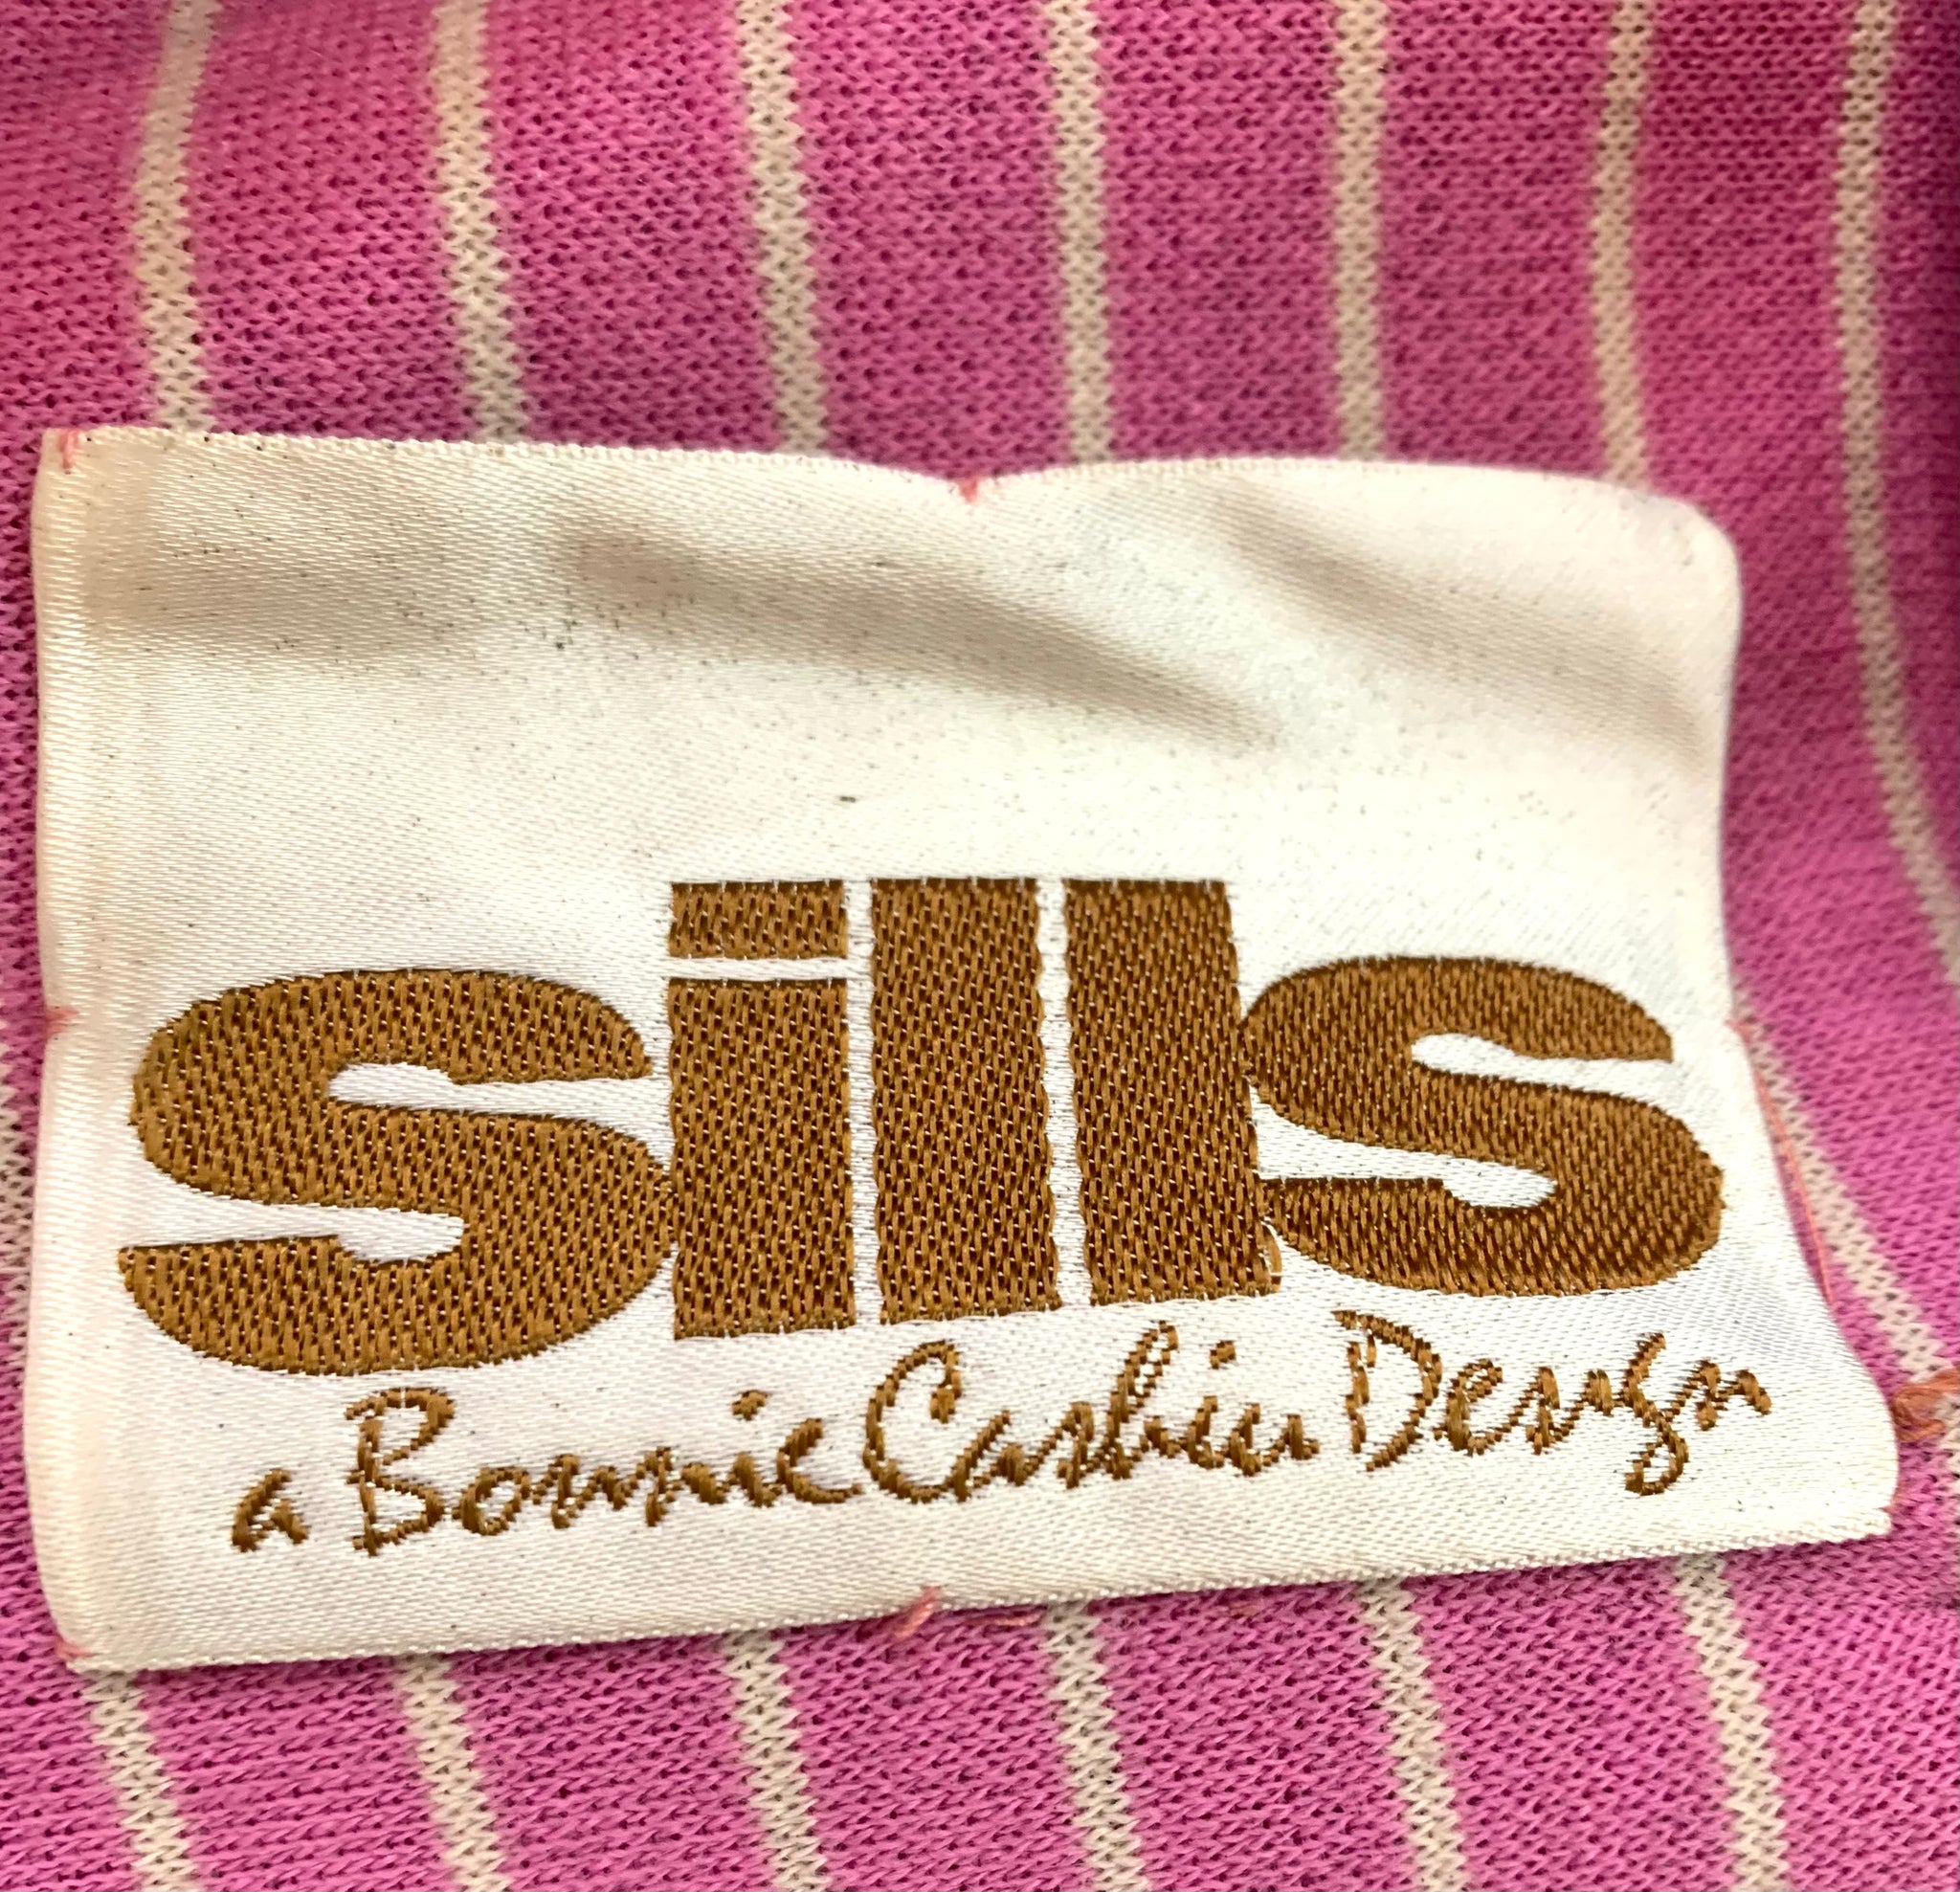  Bonnie Cashin for Sills  60s Blue and Pink LABEL 7 of 7 Striped Coat and Dress Ensemble 